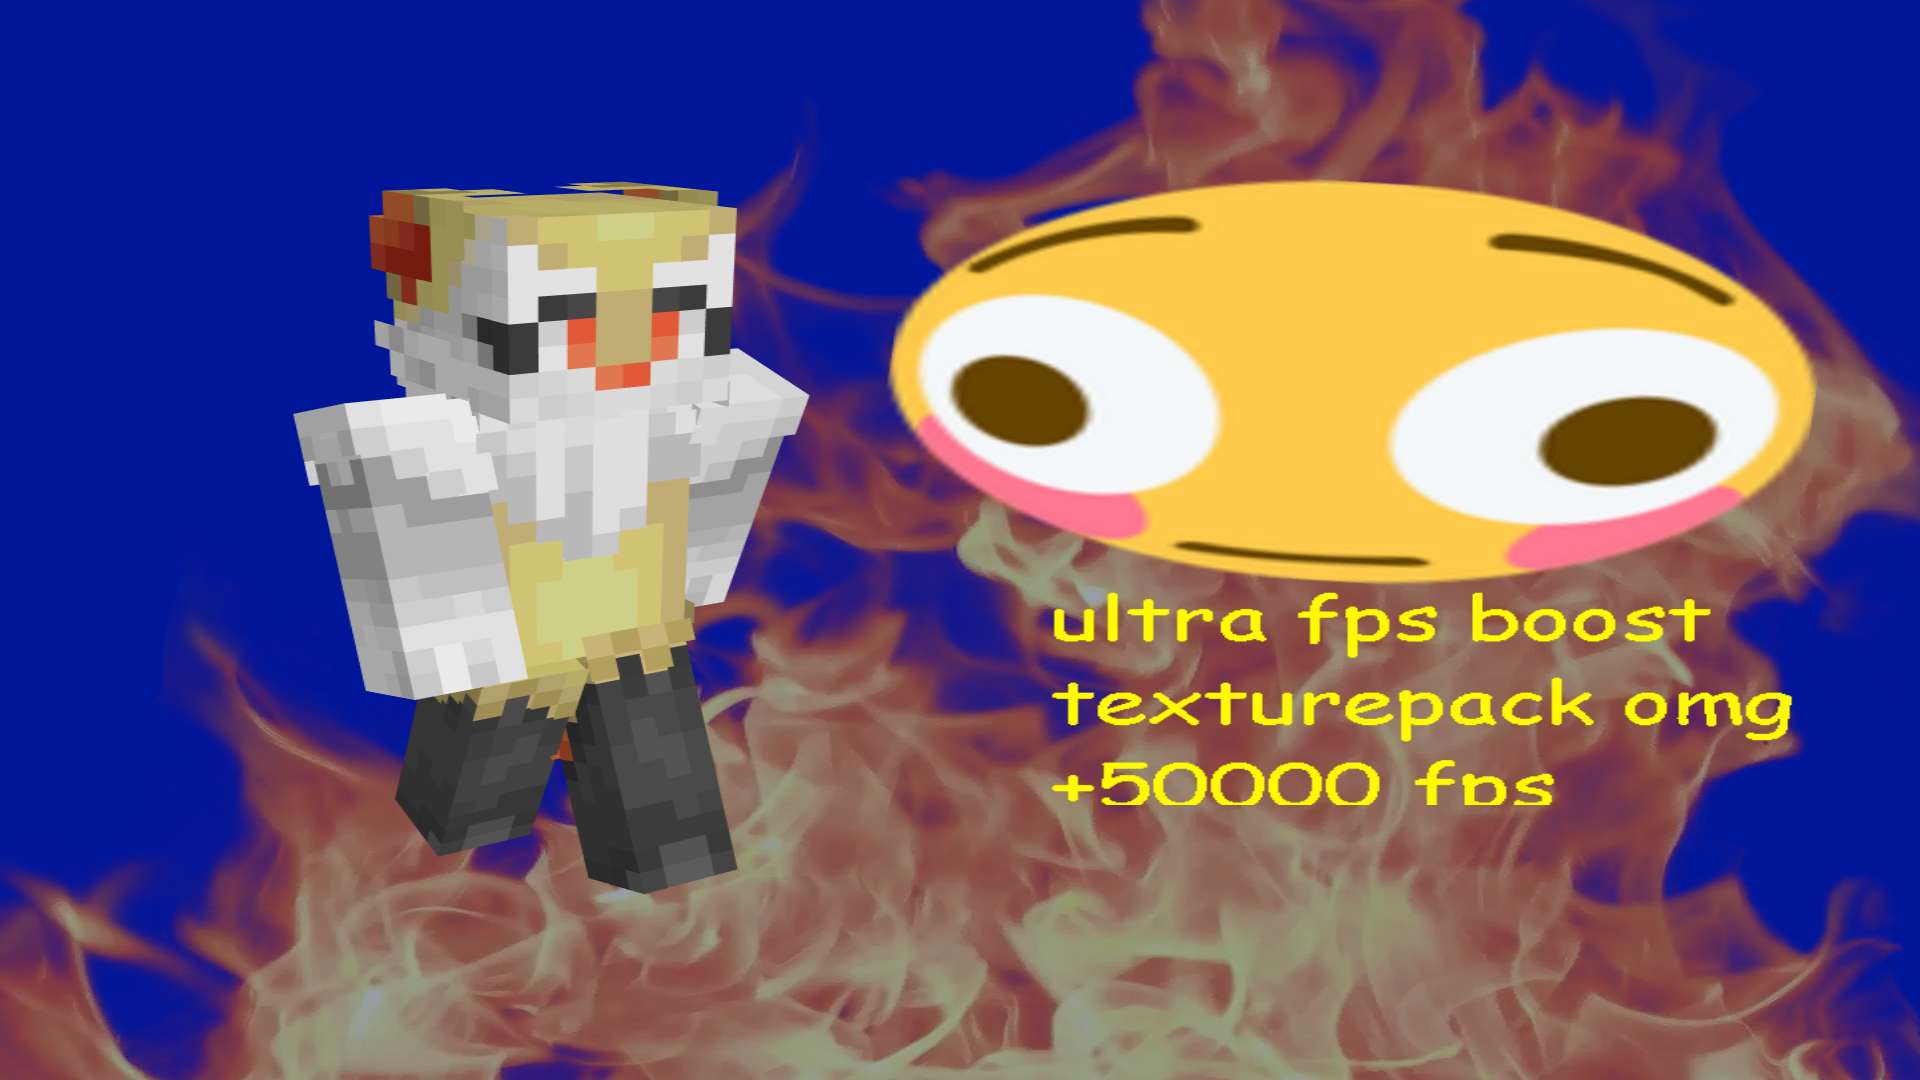 BEST TEXTURE PACK EVER OMG +50000 fps 32x by Likorrne on PvPRP